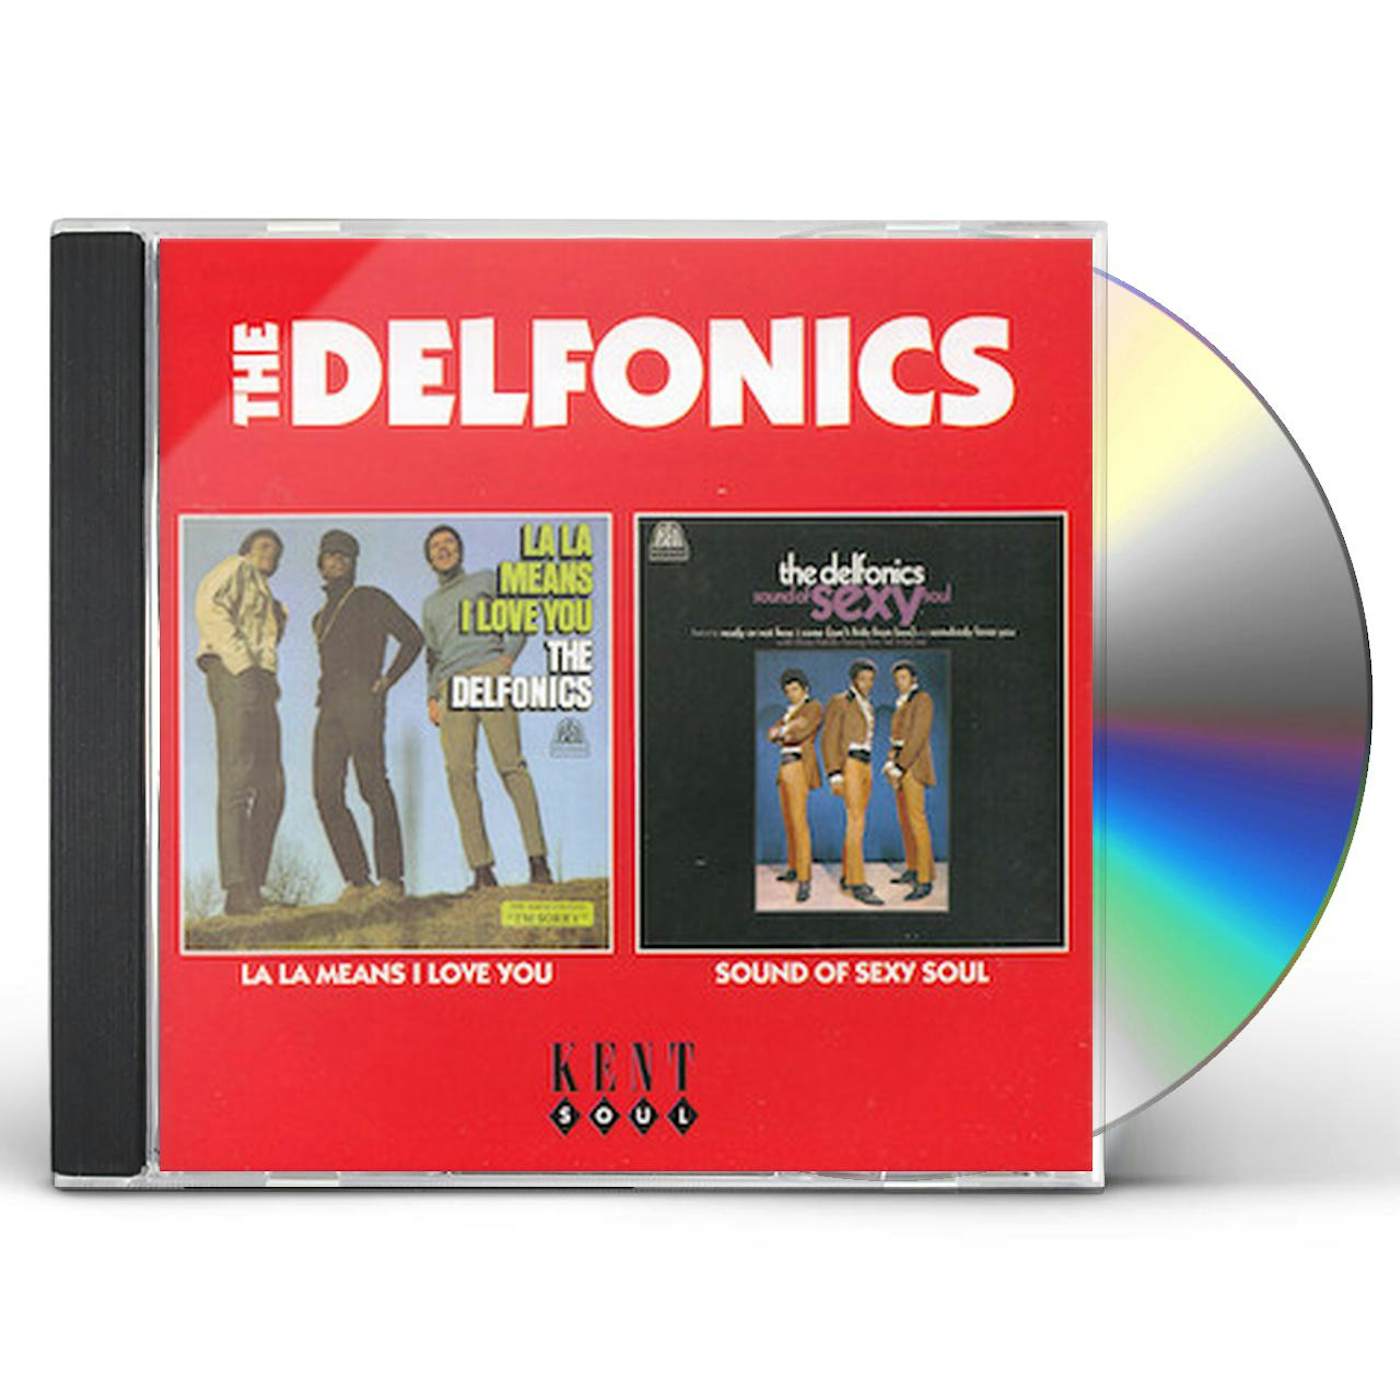 20 Greatest Hits of The Delfonics